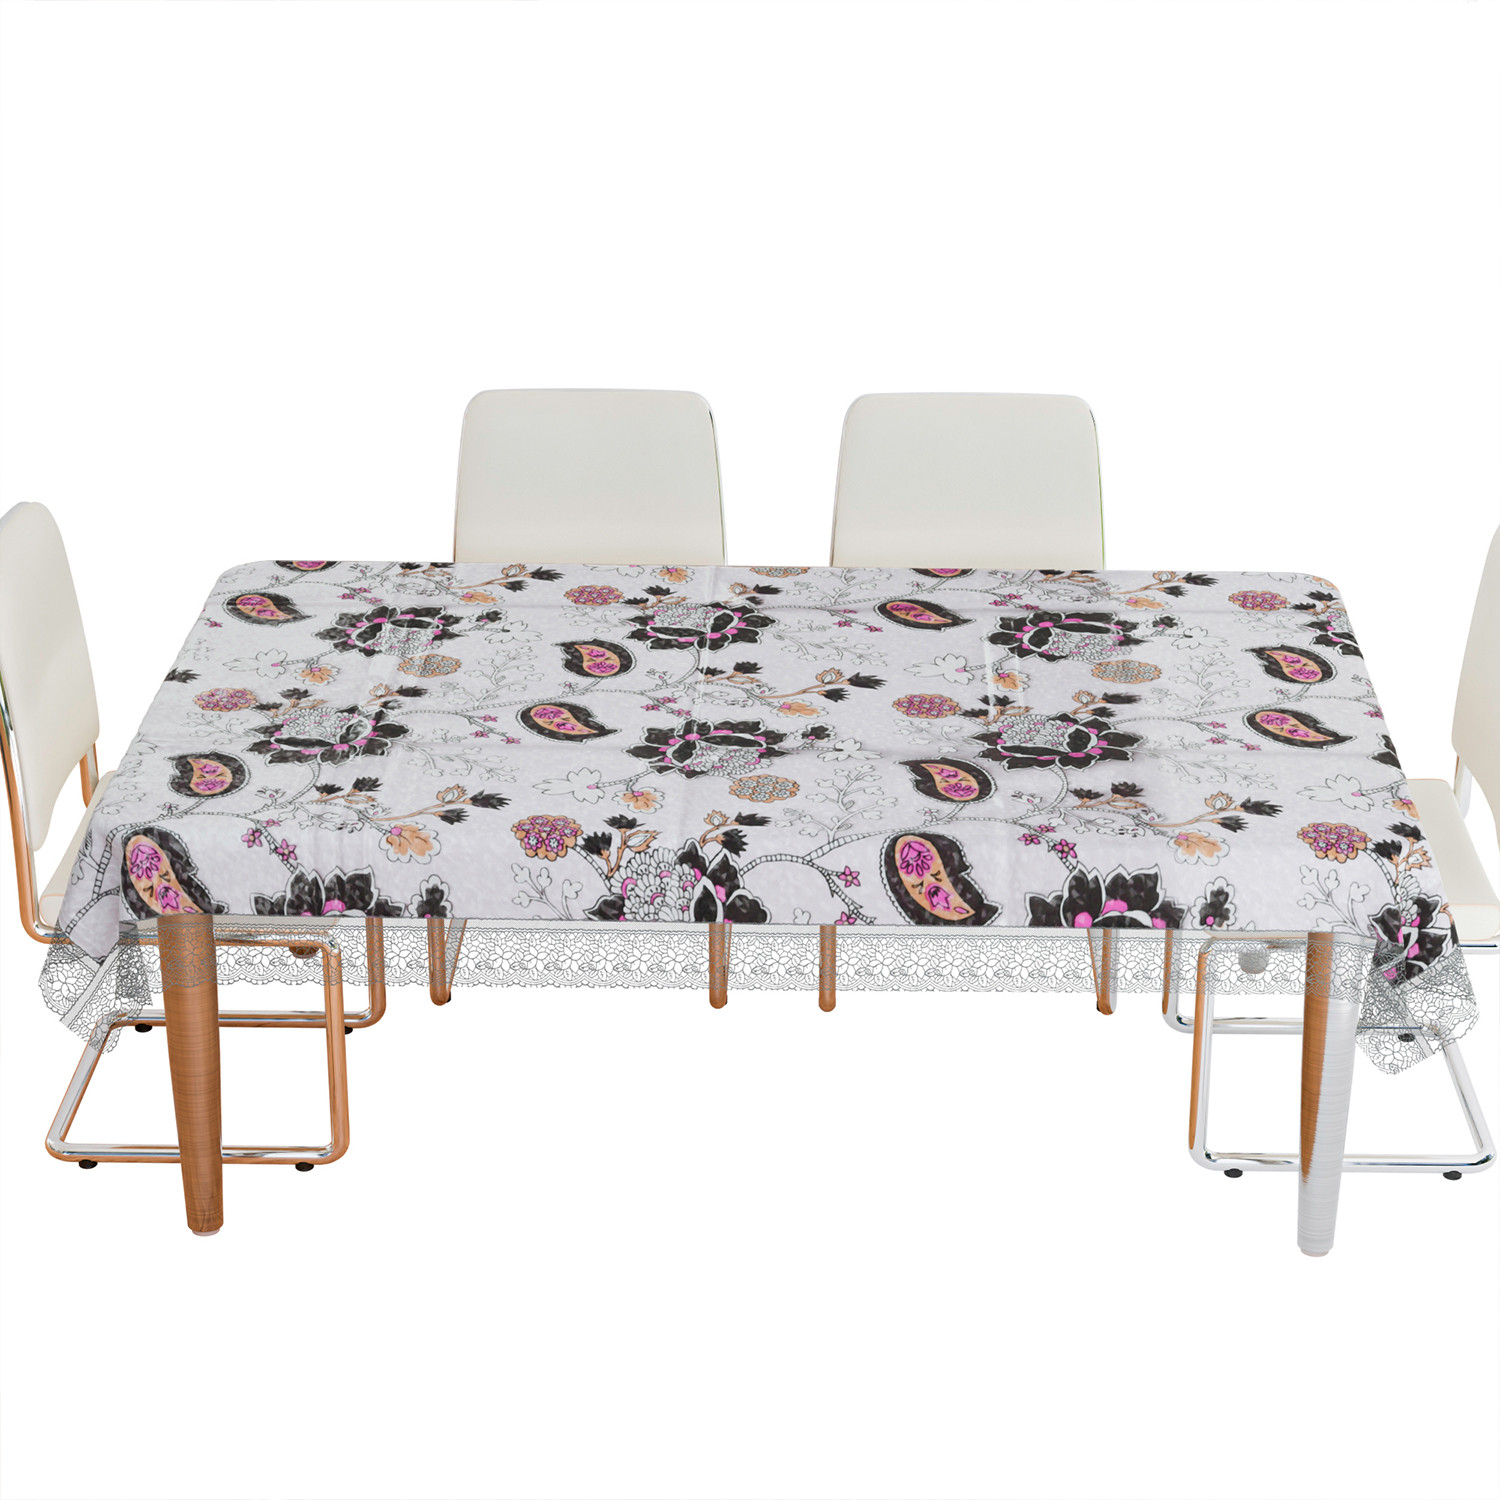 Kuber Industries Dining Table Cover | PVC Table Cloth Cover | 6 Seater Table Cloth | 3D Gulab Table Cover | Table Protector | Table Cover for Dining Table | 60x90 Inch | DTC | Black